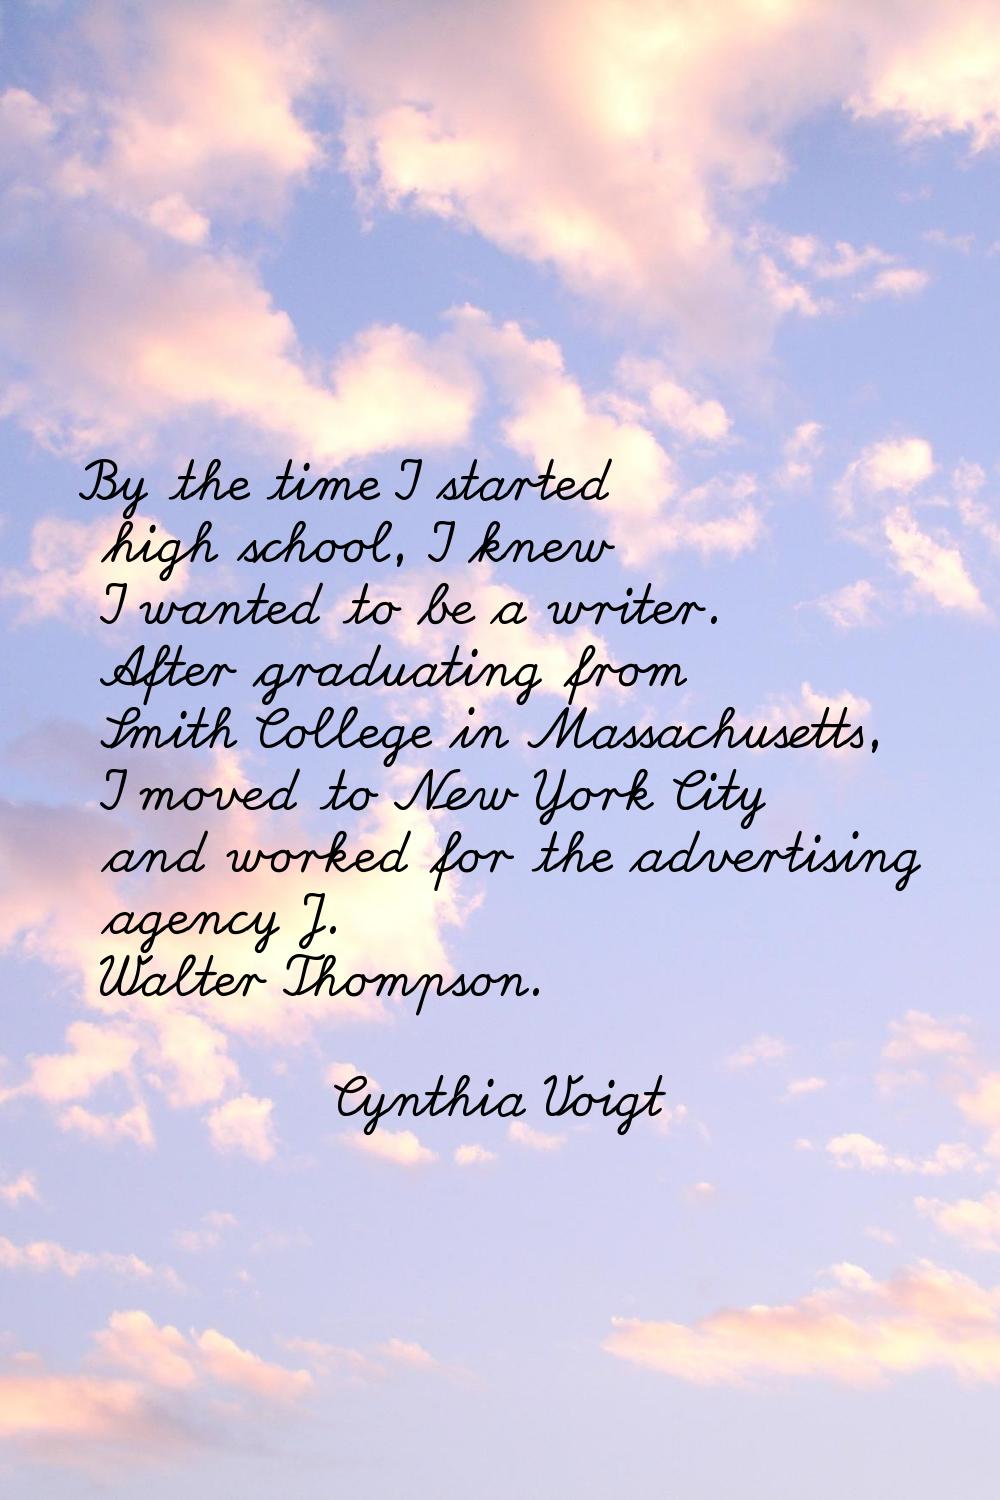 By the time I started high school, I knew I wanted to be a writer. After graduating from Smith Coll